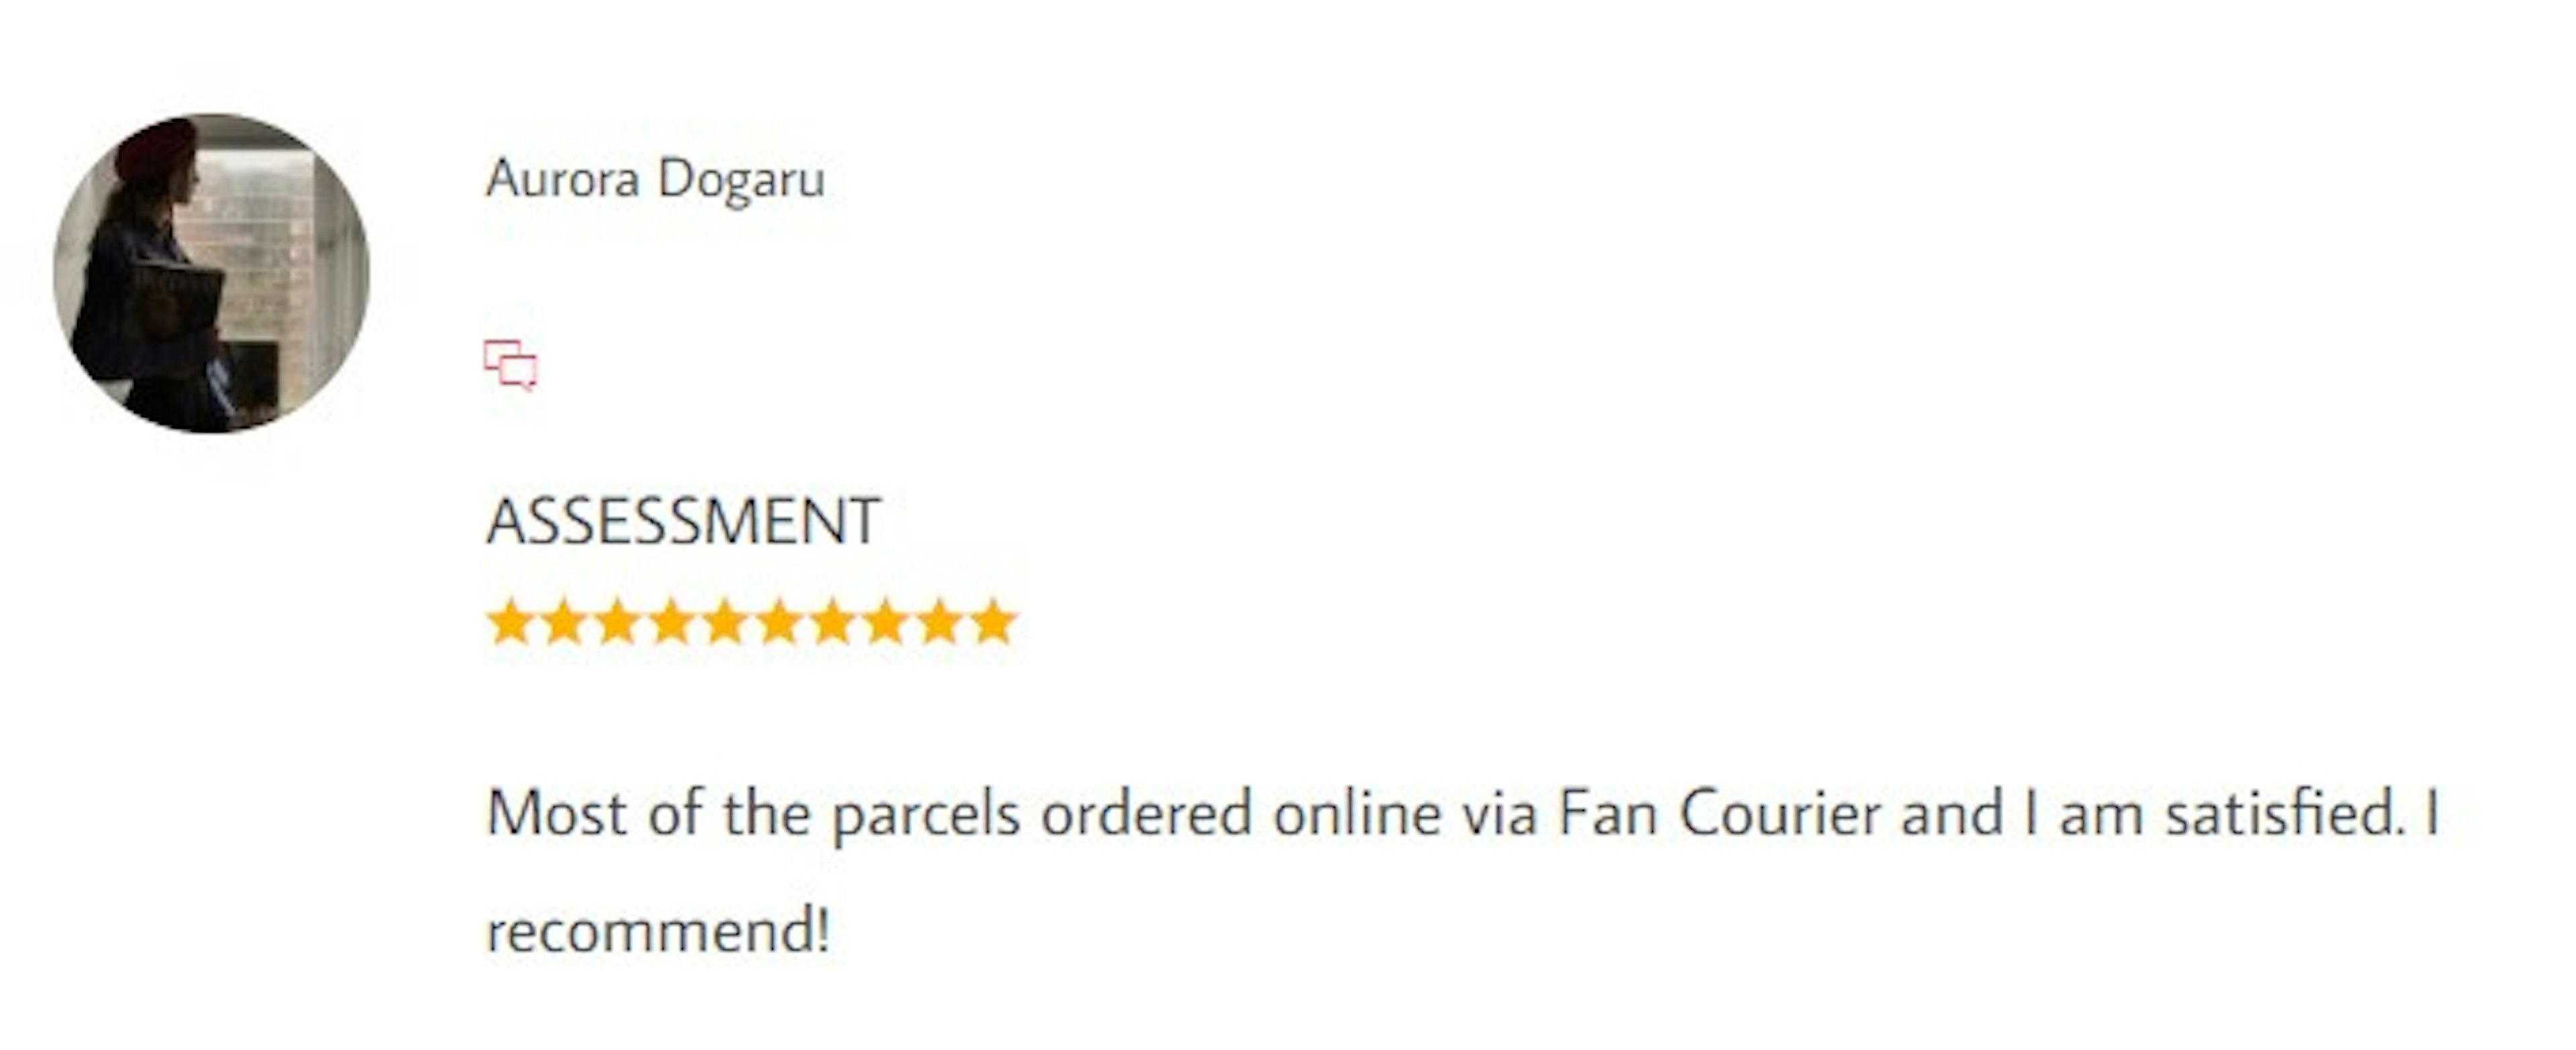 Screenshot of Fan Courier's tracking review page on a computer screen.